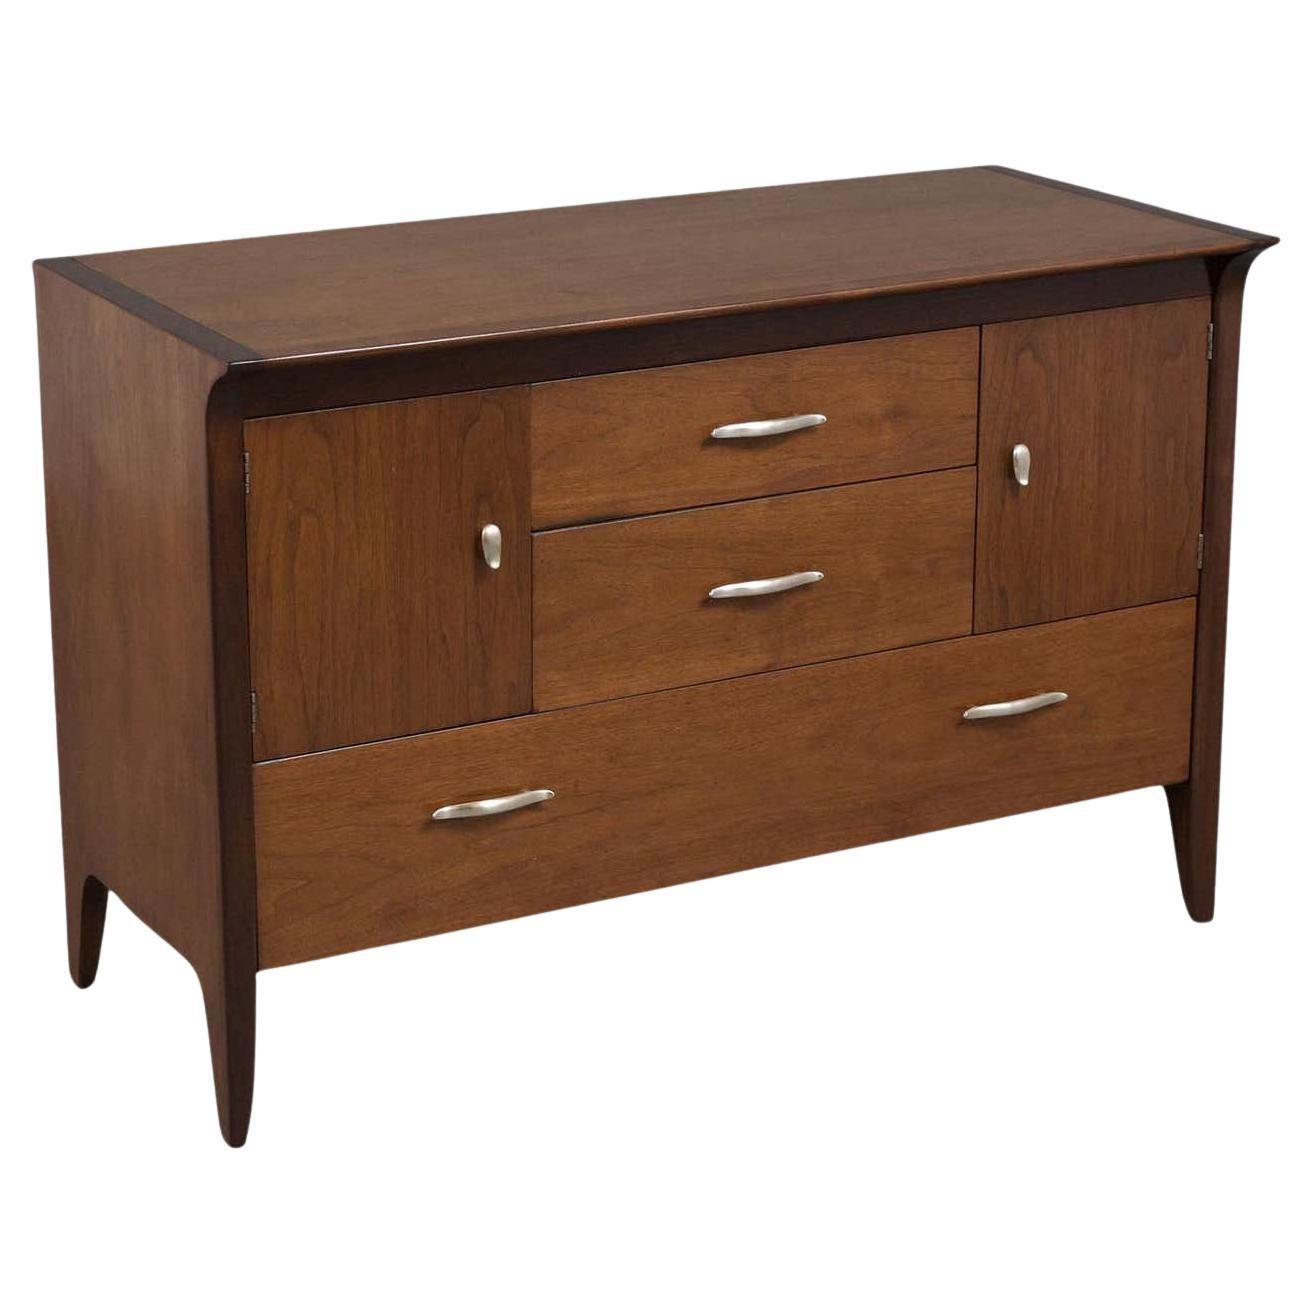 Mid-Century Modern Walnut Chest of Drawers: 1960s Elegance Redefined For Sale